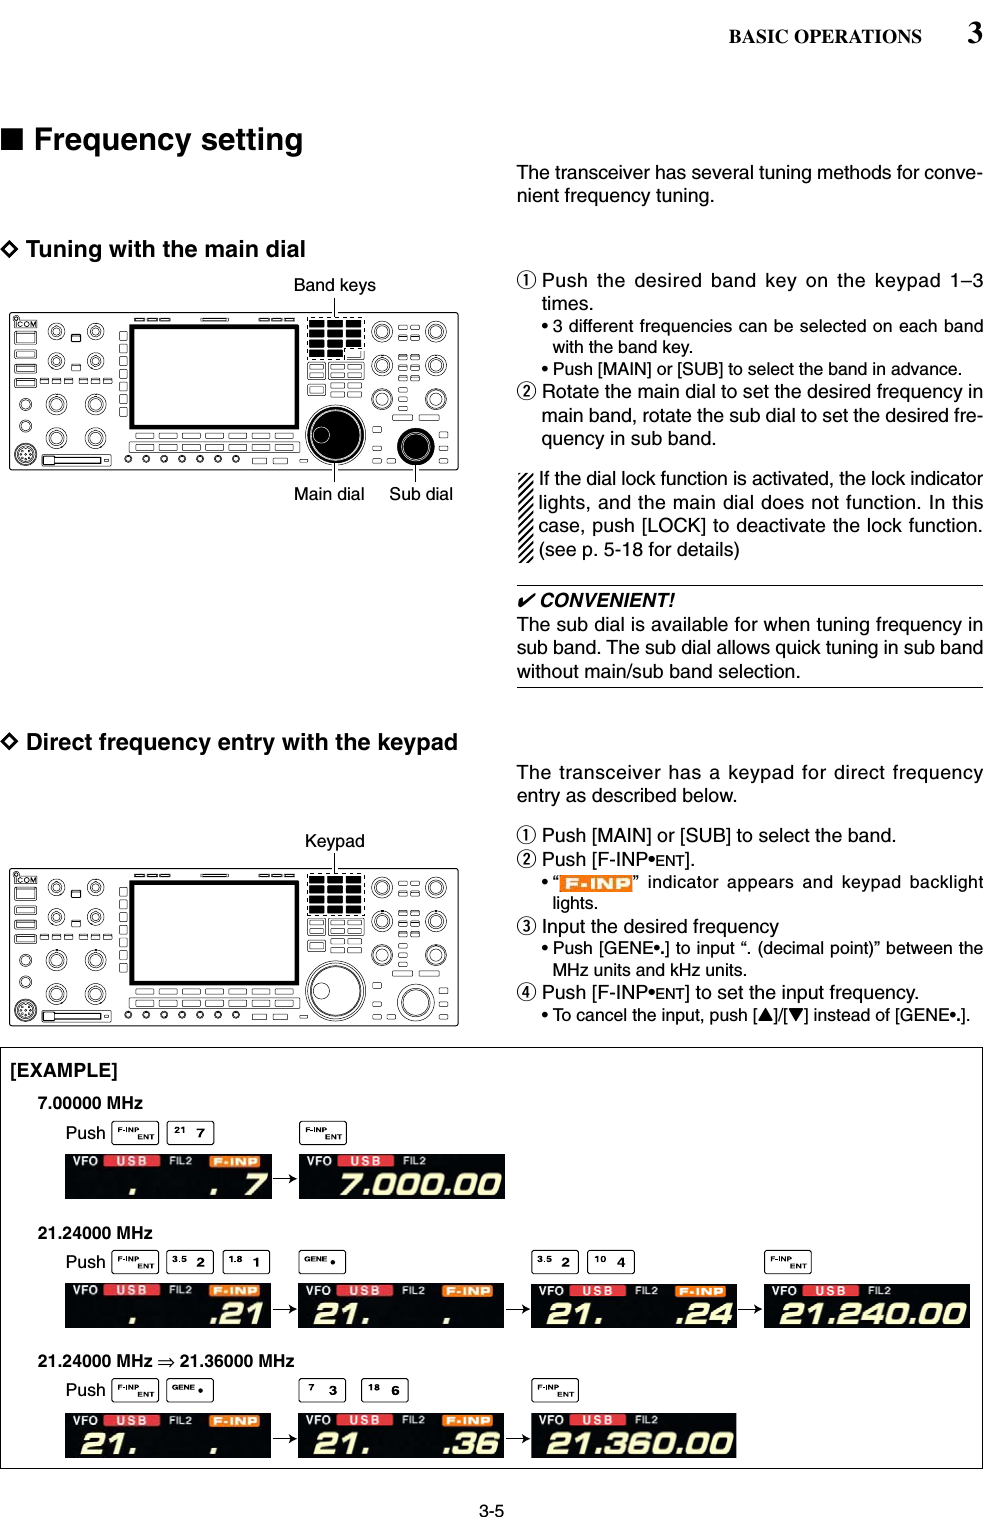 3-5■Frequency settingThe transceiver has several tuning methods for conve-nient frequency tuning.DTuning with the main dialqPush the desired band key on the keypad 1–3times.• 3 different frequencies can be selected on each bandwith the band key.• Push [MAIN] or [SUB] to select the band in advance.wRotate the main dial to set the desired frequency inmain band, rotate the sub dial to set the desired fre-quency in sub band.If the dial lock function is activated, the lock indicatorlights, and the main dial does not function. In thiscase, push [LOCK] to deactivate the lock function.(see p. 5-18 for details)✔CONVENIENT!The sub dial is available for when tuning frequency insub band. The sub dial allows quick tuning in sub bandwithout main/sub band selection.DDirect frequency entry with the keypadThe transceiver has a keypad for direct frequencyentry as described below.qPush [MAIN] or [SUB] to select the band.wPush [F-INP•ENT].• “ ” indicator appears and keypad backlightlights.eInput the desired frequency • Push [GENE•.] to input “. (decimal point)” between theMHz units and kHz units.rPush [F-INP•ENT] to set the input frequency.• To cancel the input, push [Y]/[Z] instead of [GENE•.].[EXAMPLE]7.00000 MHz21.24000 MHz21.24000 MHz ⇒ 21.36000 MHzPushPushPushKeypadBand keysMain dial Sub dial3BASIC OPERATIONS